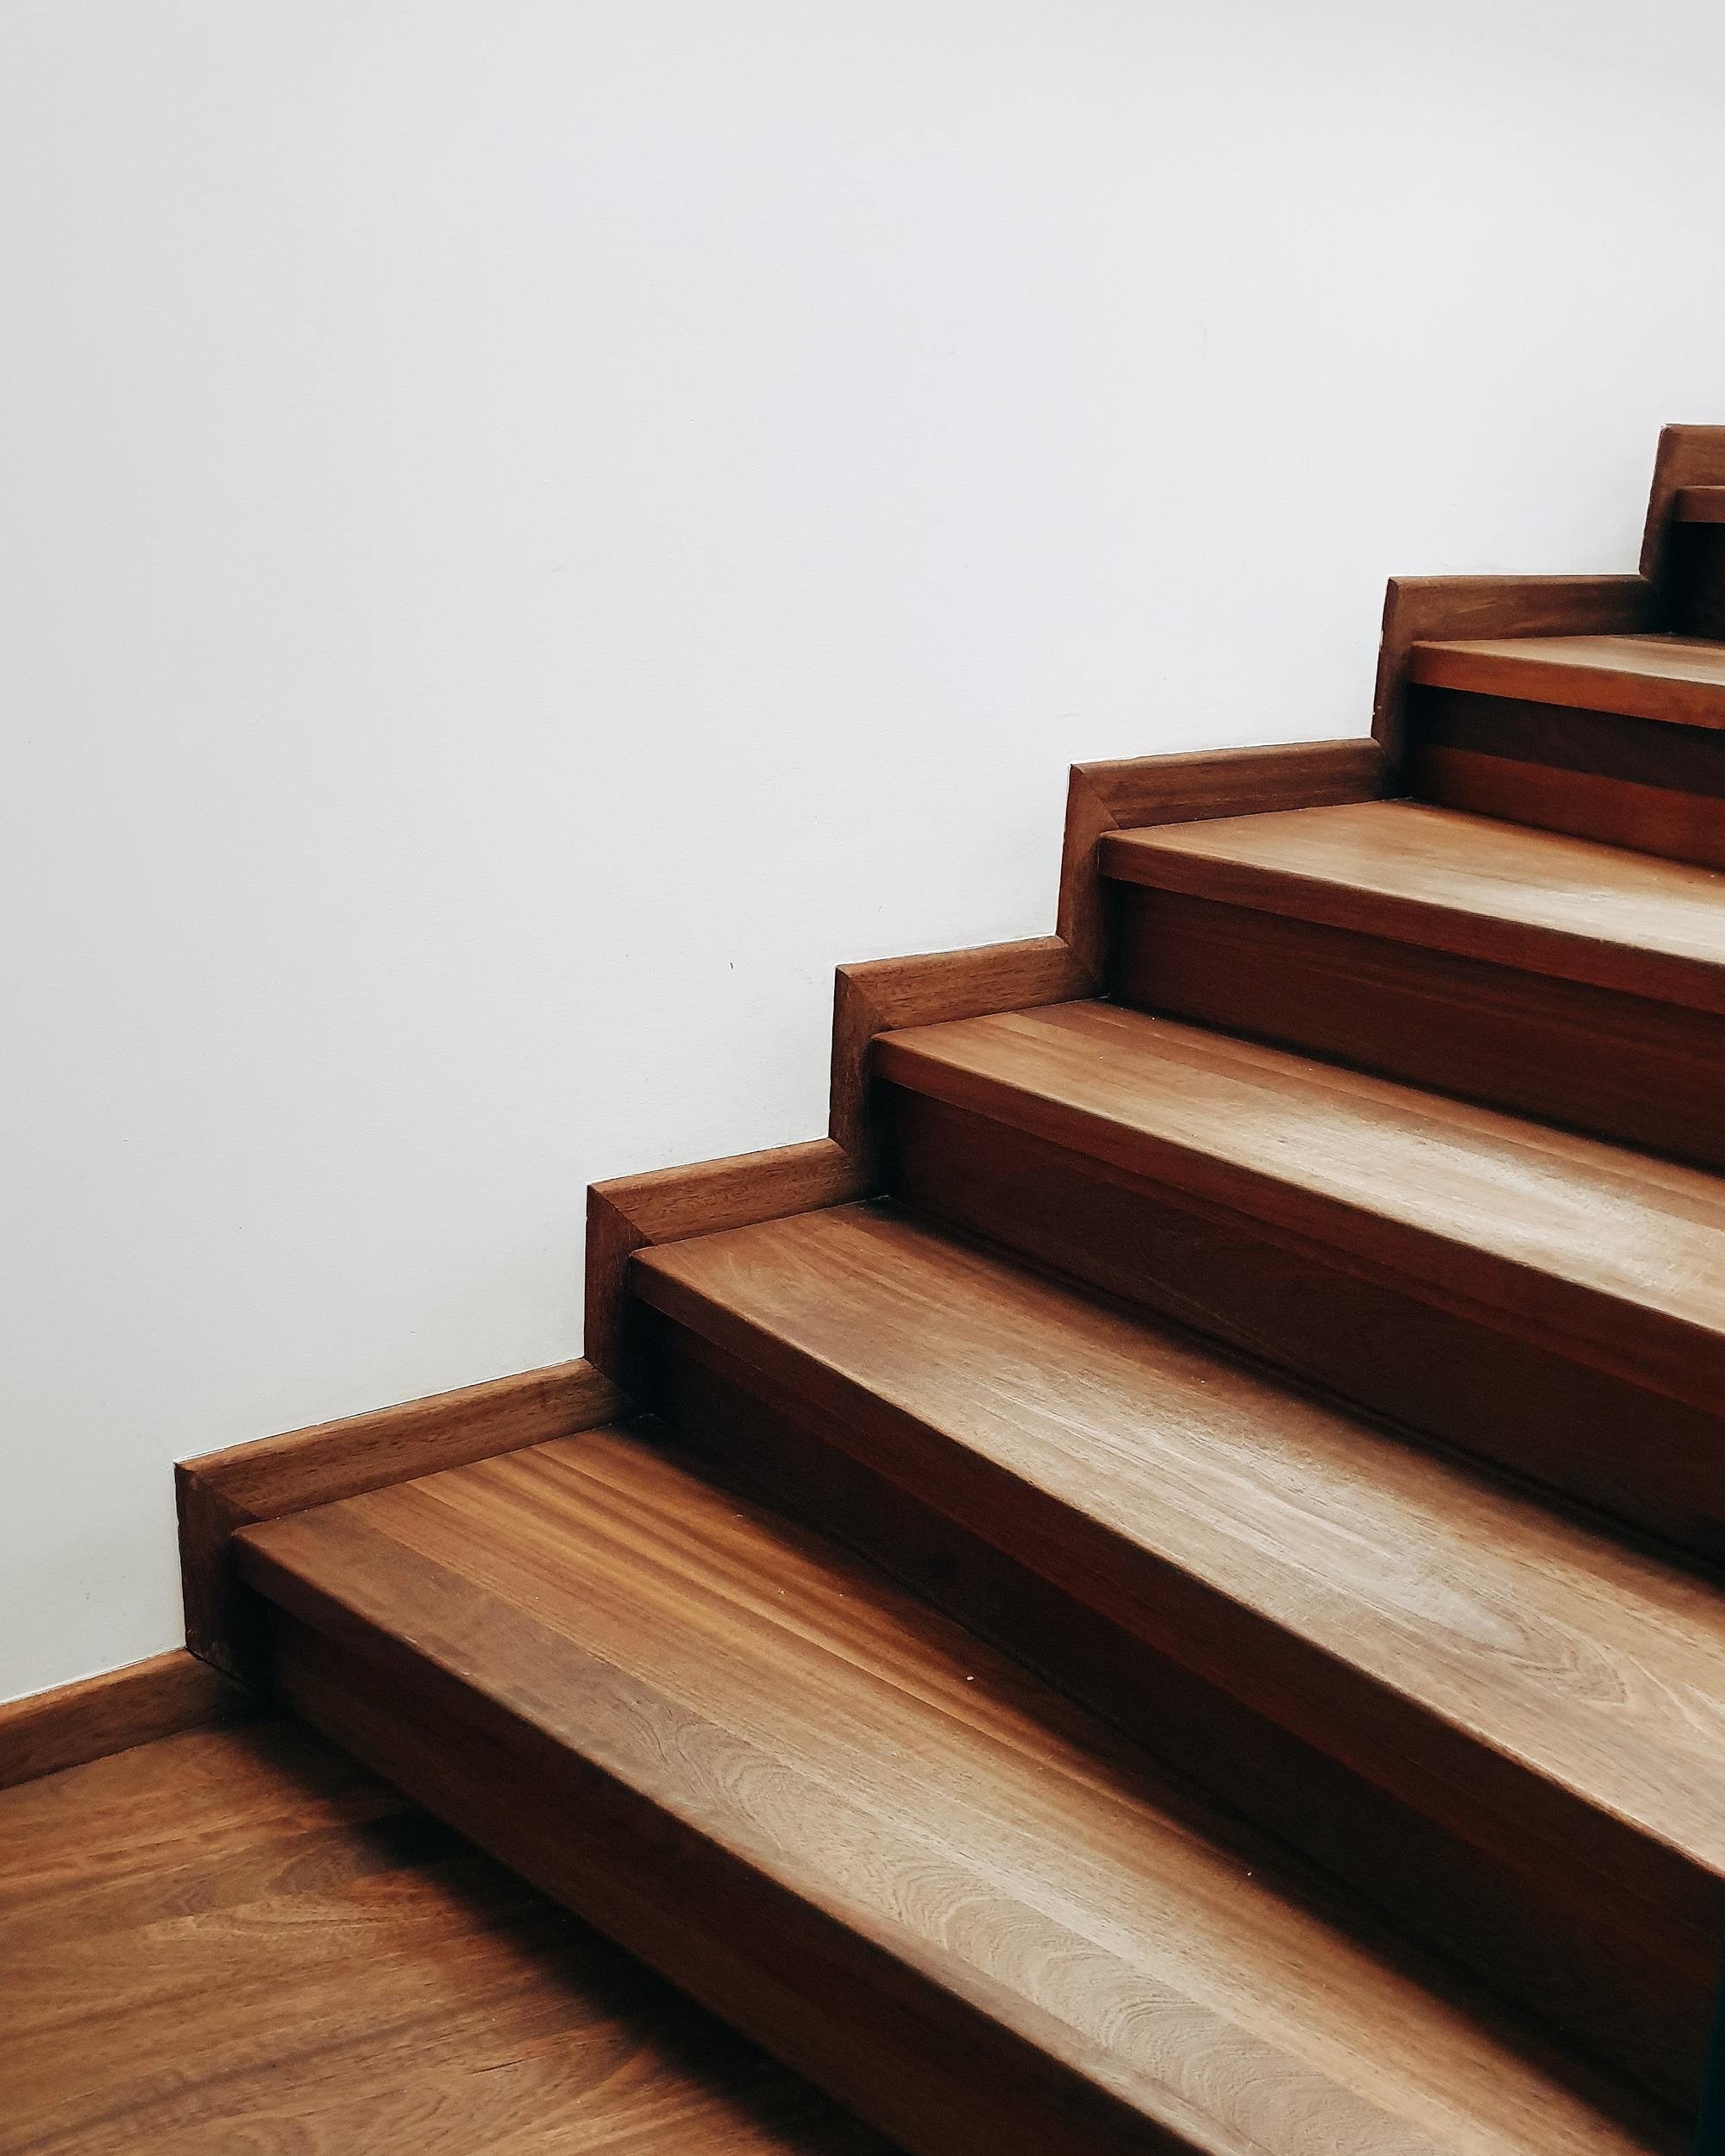 What Are The Factors To Consider When Designing A Staircase?